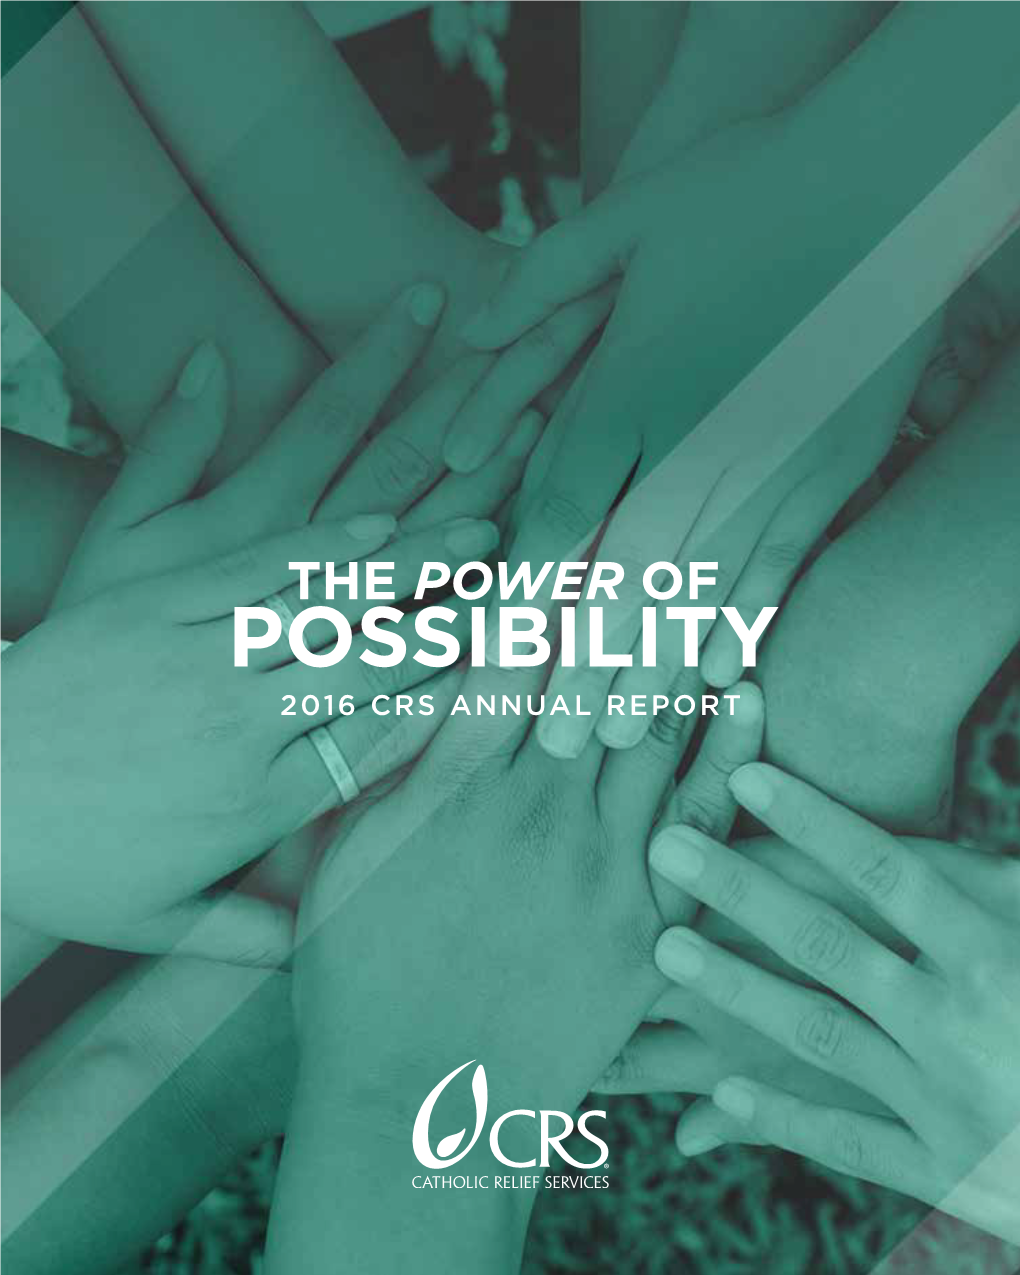 Possibility 2016 Crs Annual Report 2016 Crs Annual Report